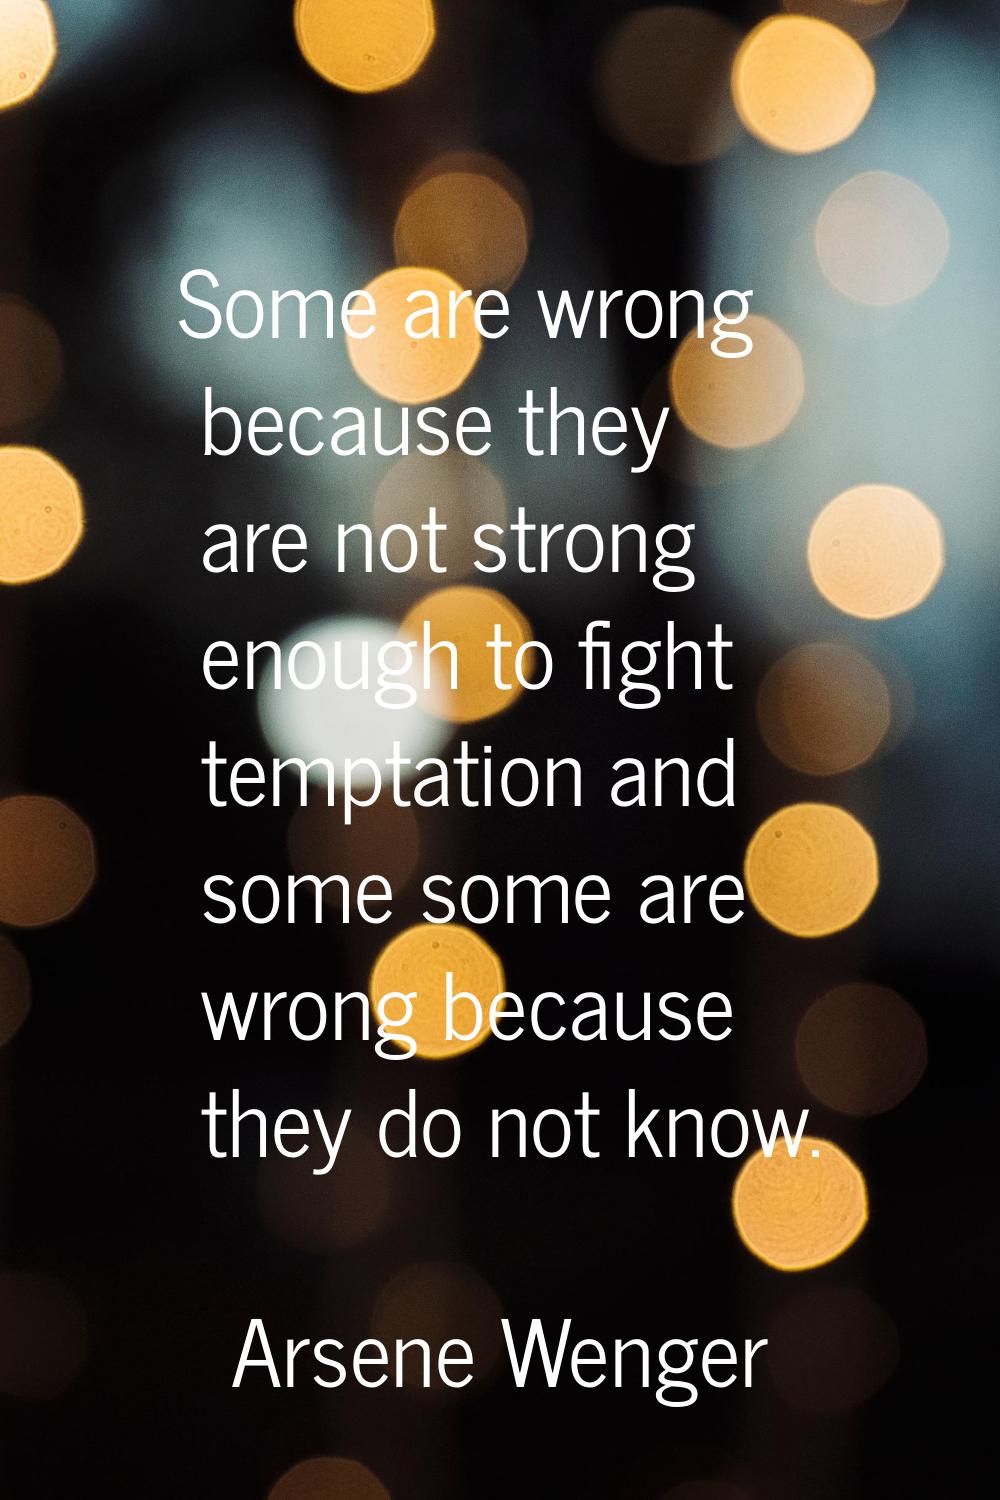 Some are wrong because they are not strong enough to fight temptation and some some are wrong becau